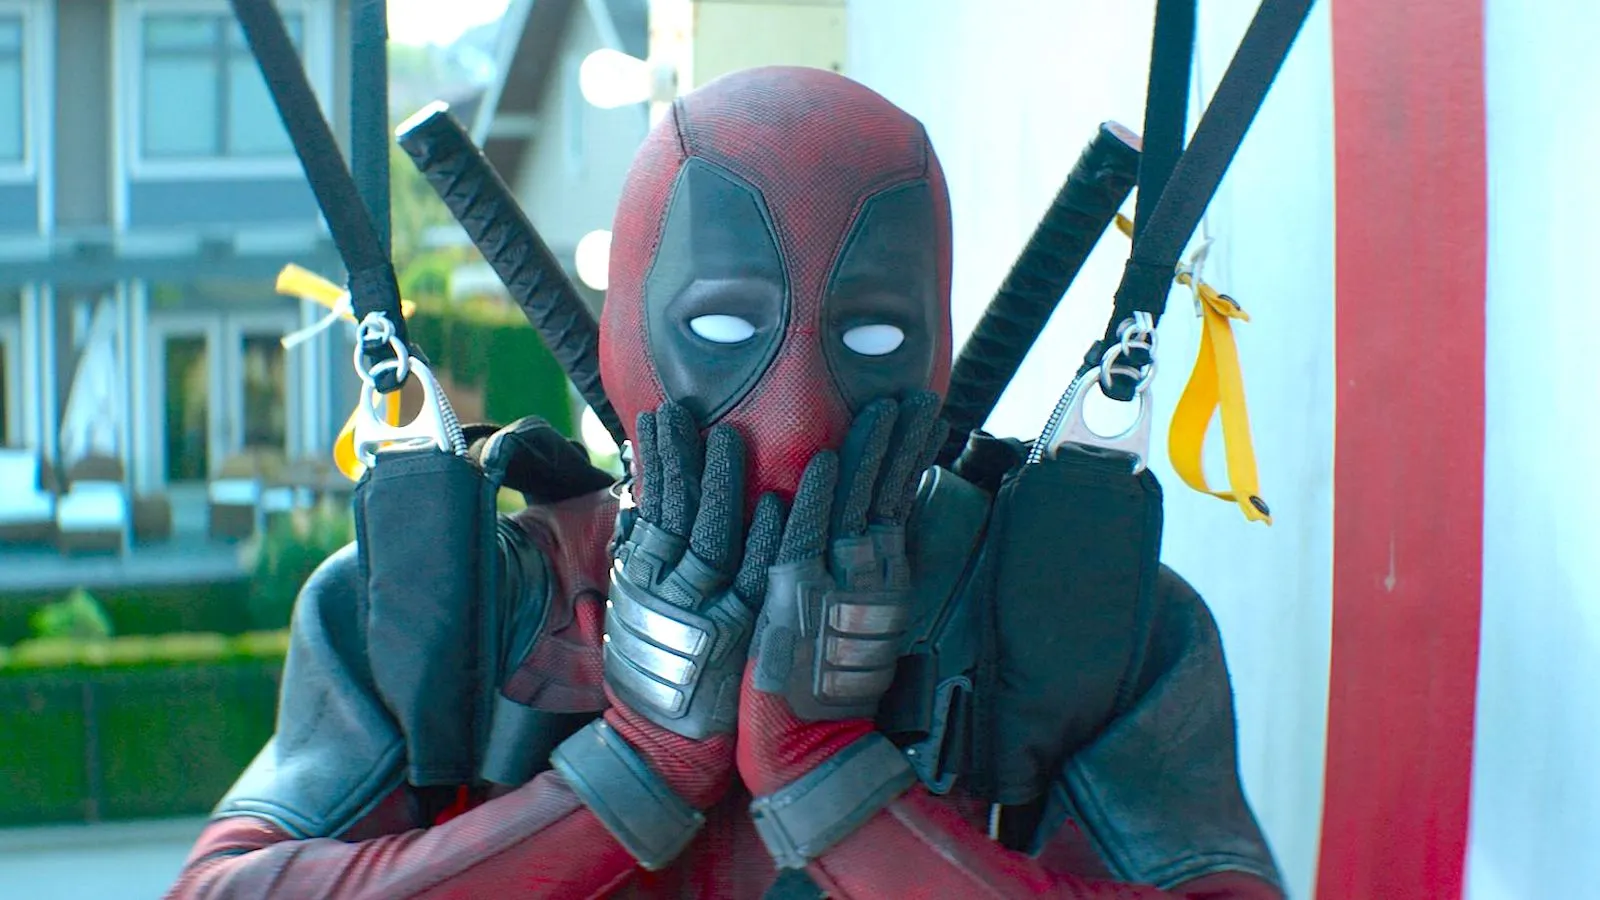 When does Deadpool 3 come out? Deadpool 3 release date confirmed